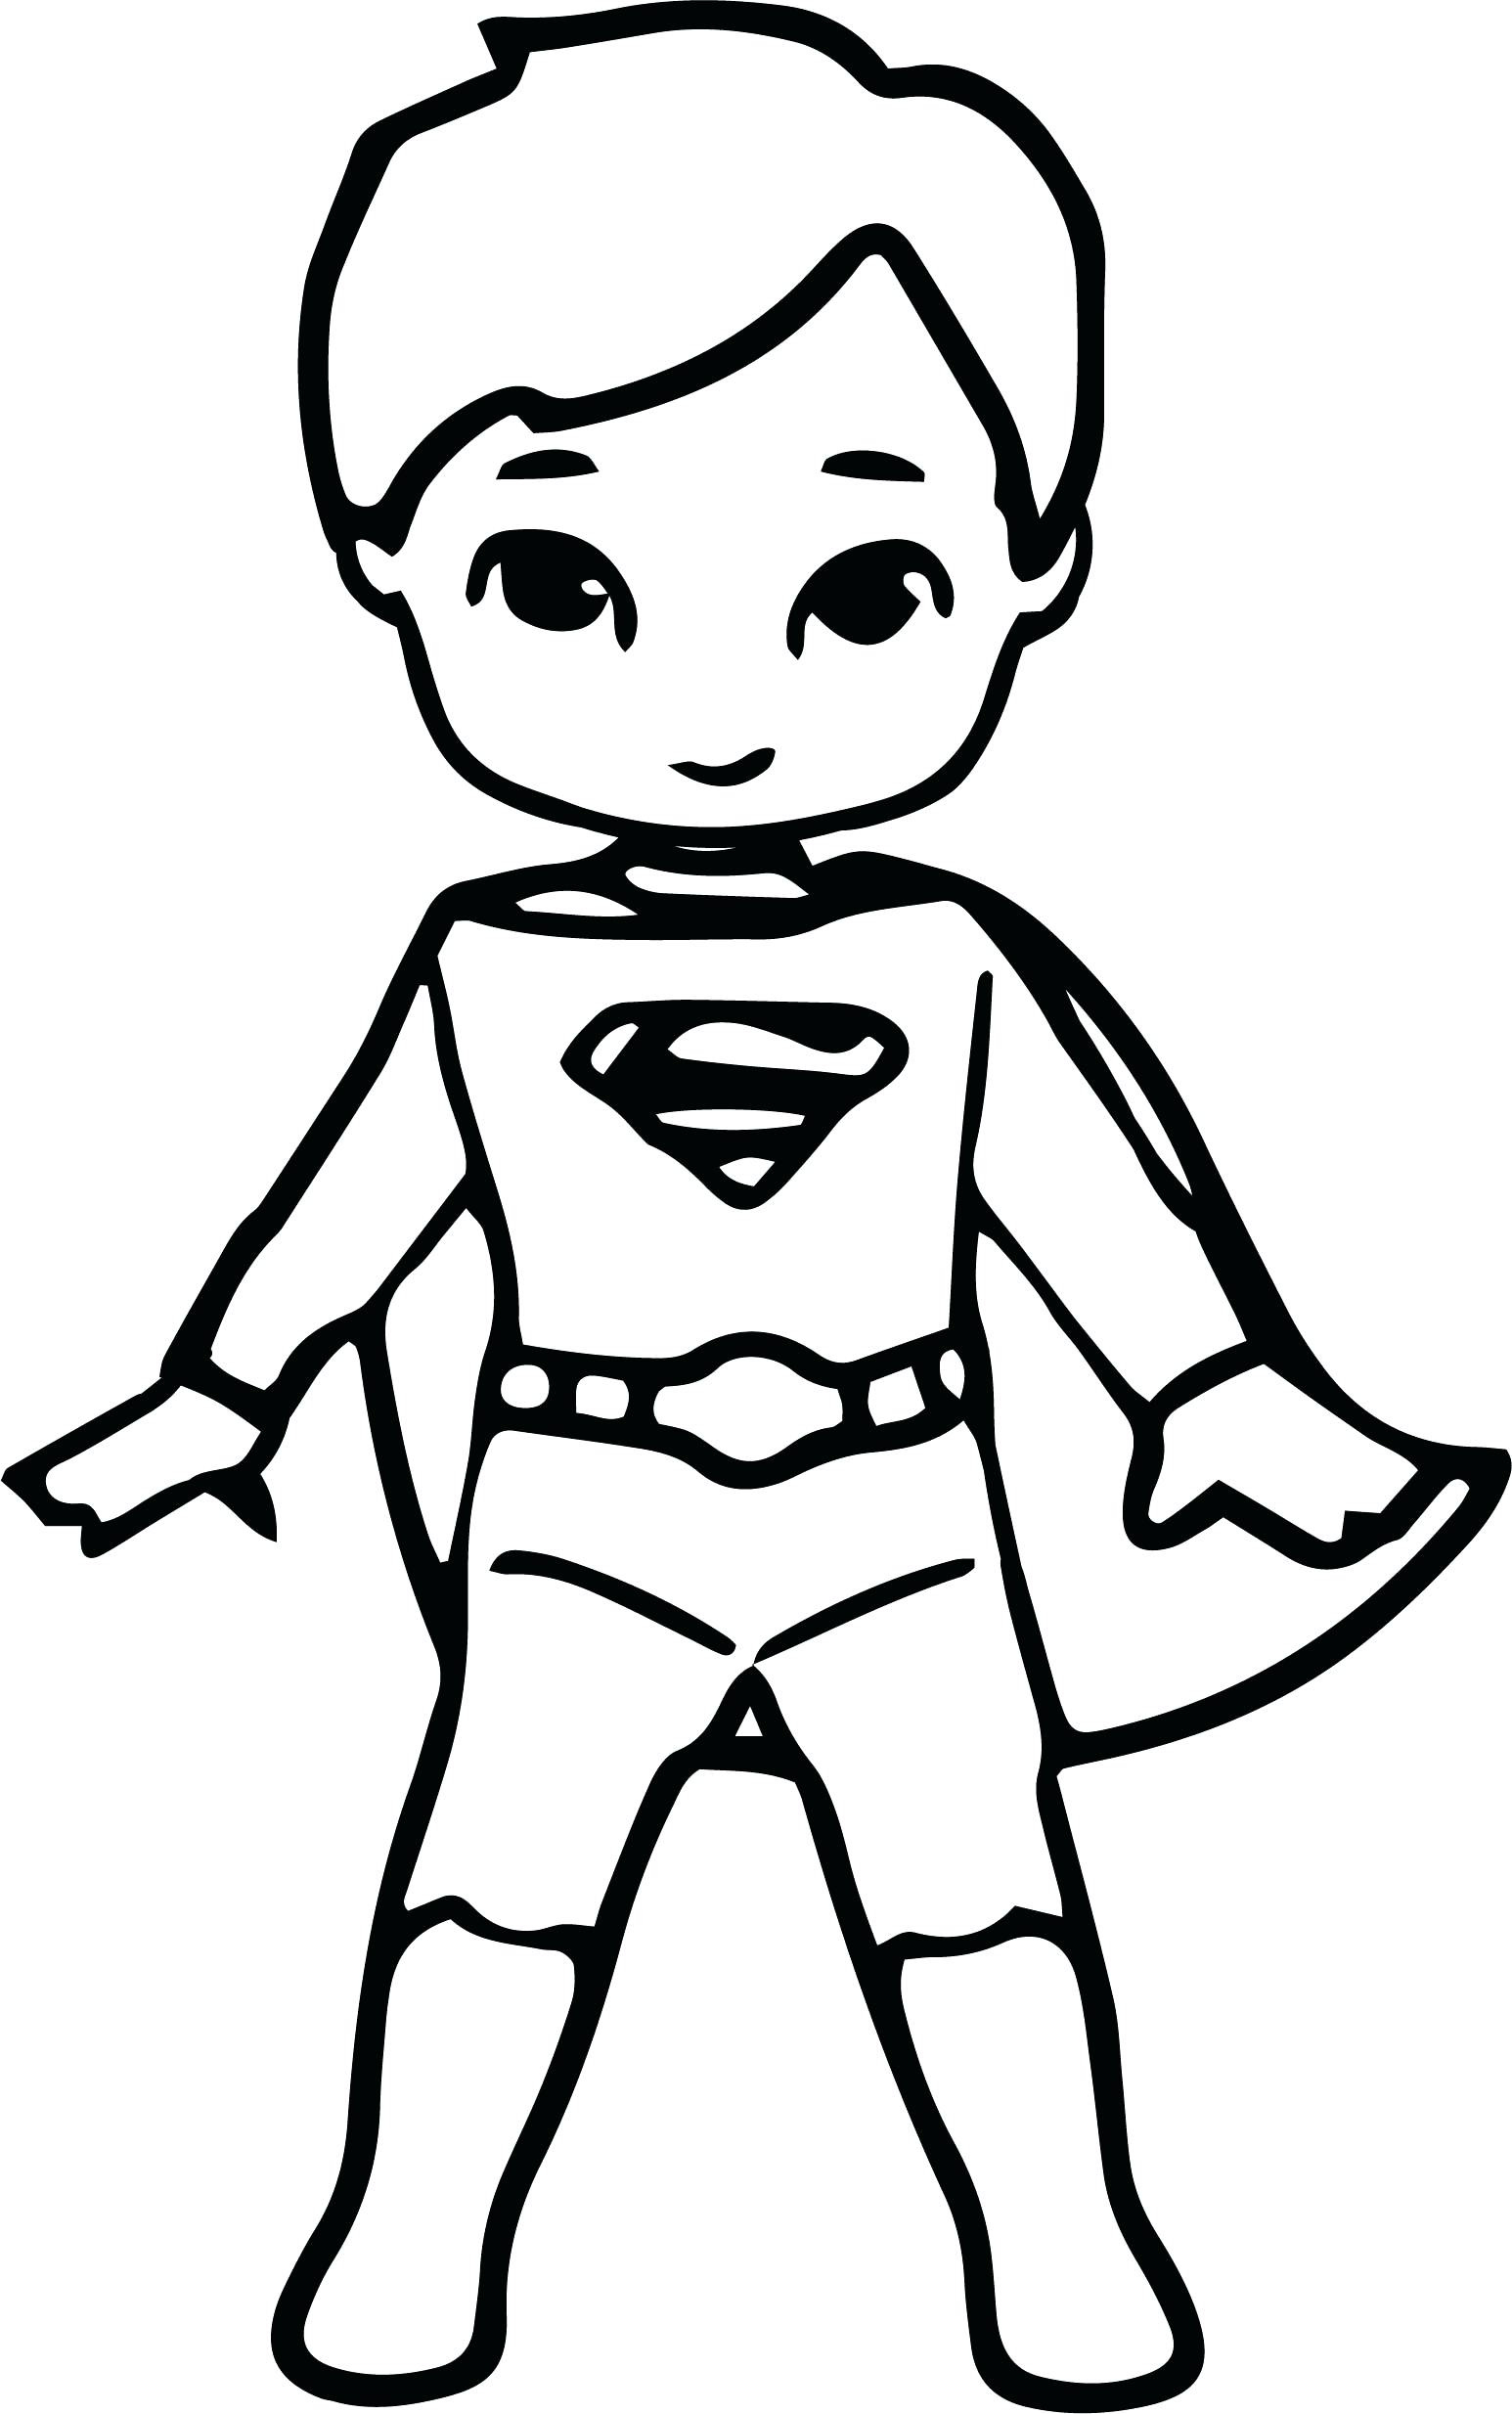 Superhero Outline Drawing | Free download on ClipArtMag